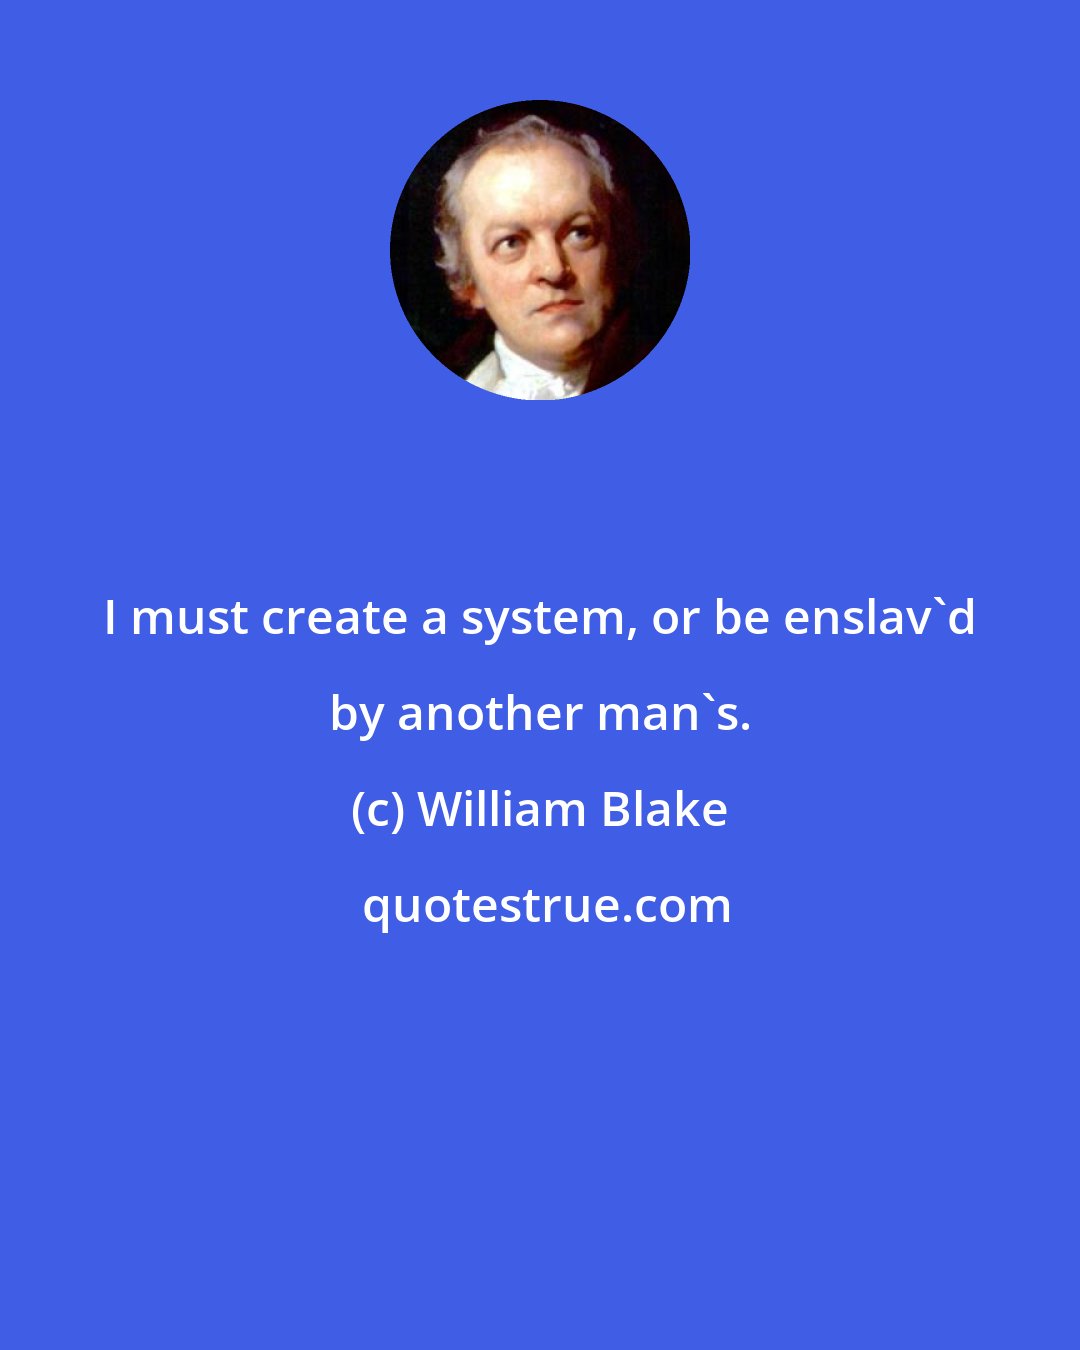 William Blake: I must create a system, or be enslav'd by another man's.